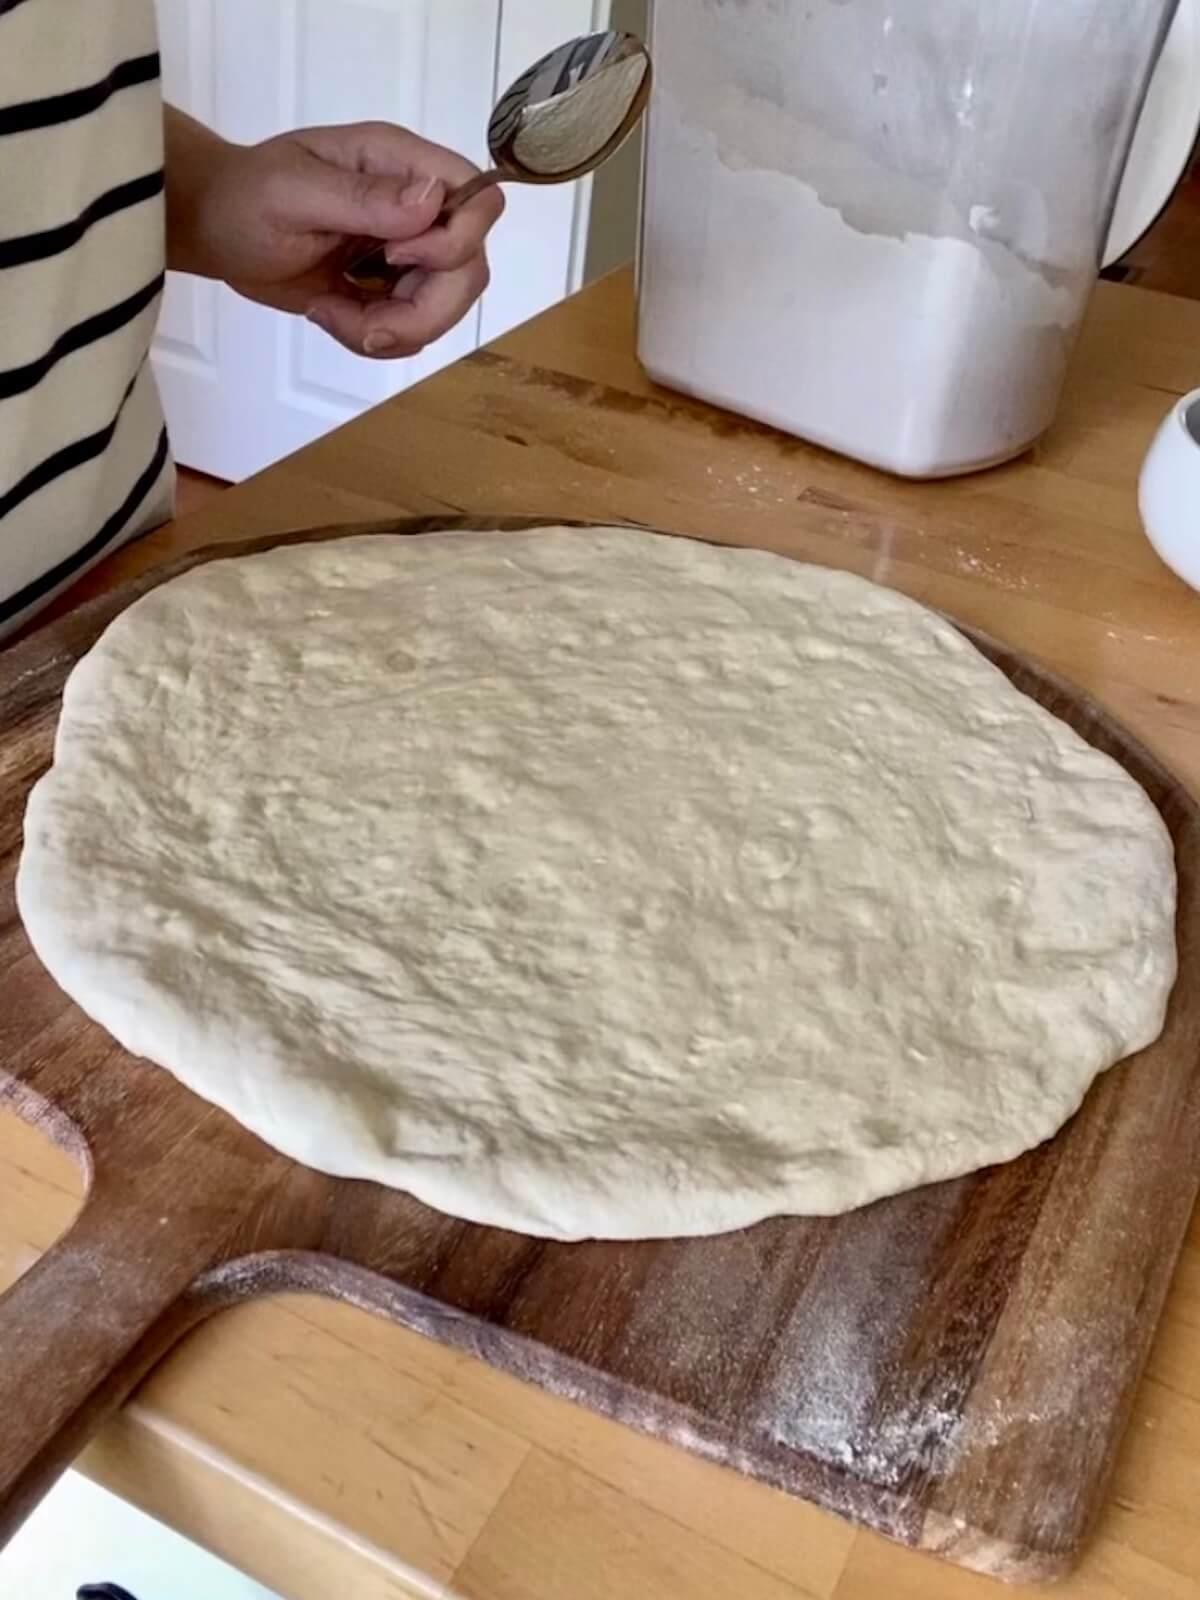 A pizza dough stretched into a large round on a pizza peel.